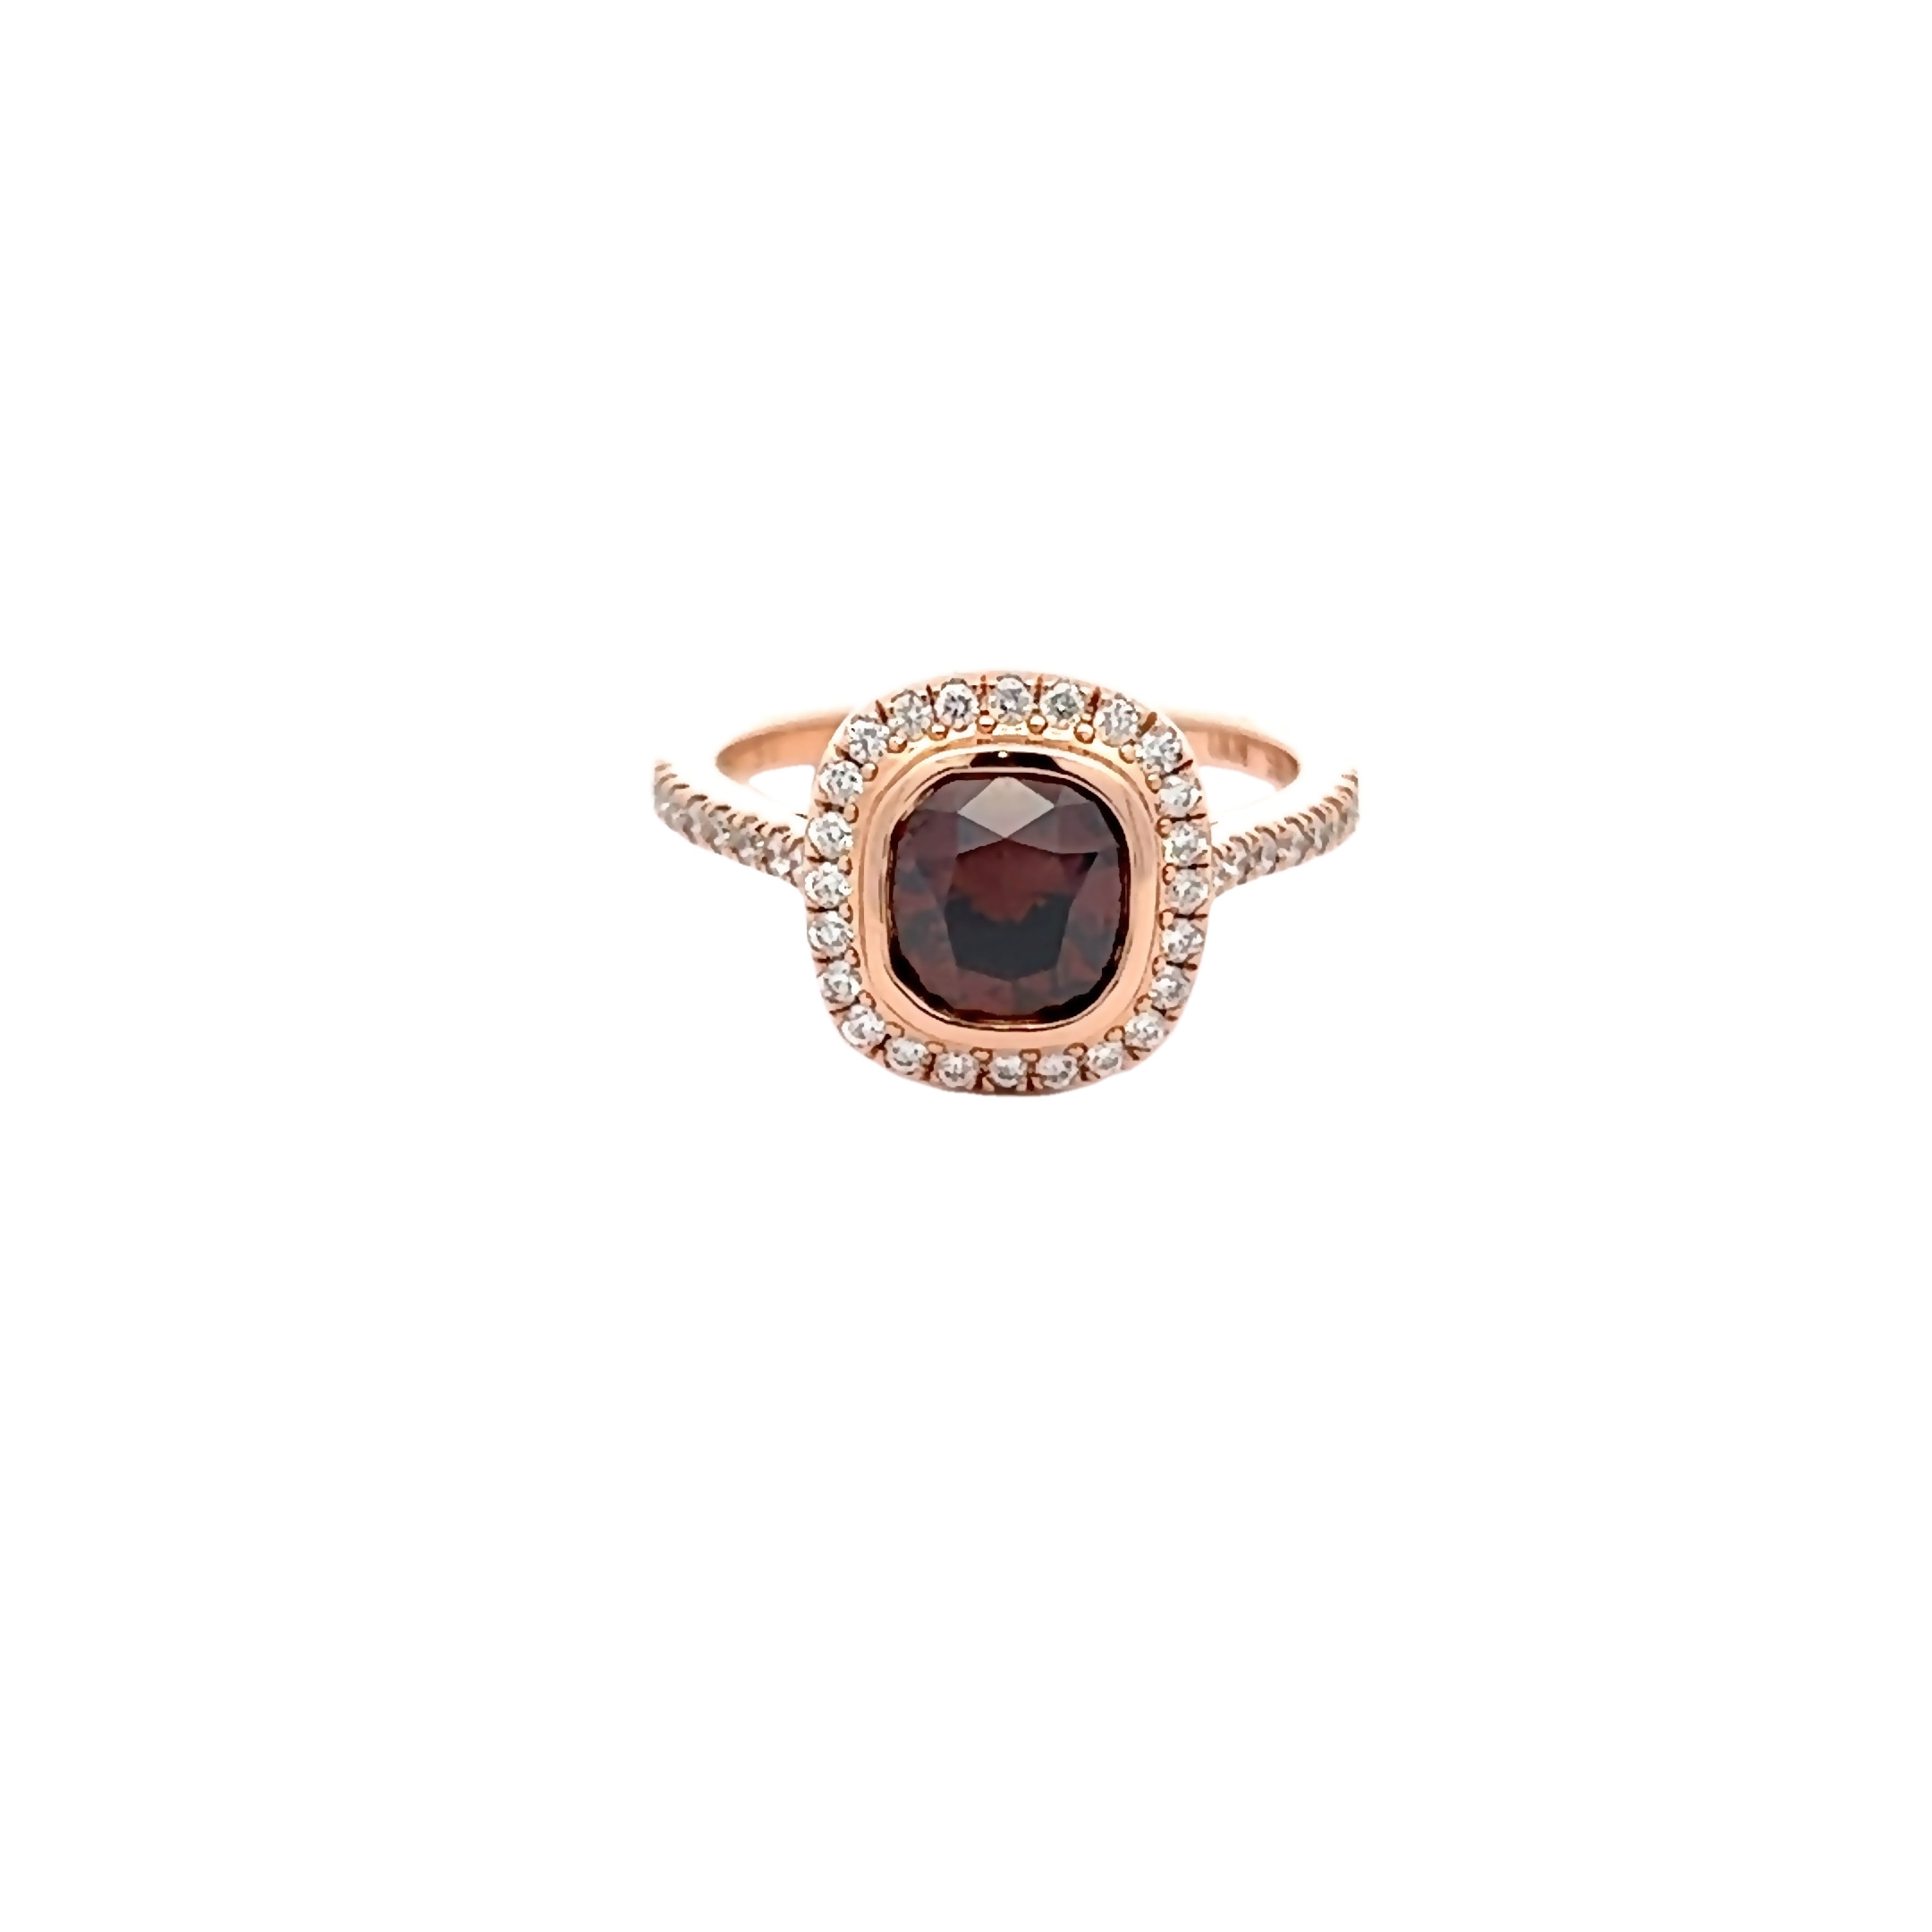 14 Karat rose gold ring with One 1.50Ct cushion chocolate Diamond and 40=0.30 total weight round brilliant G VS Diamonds